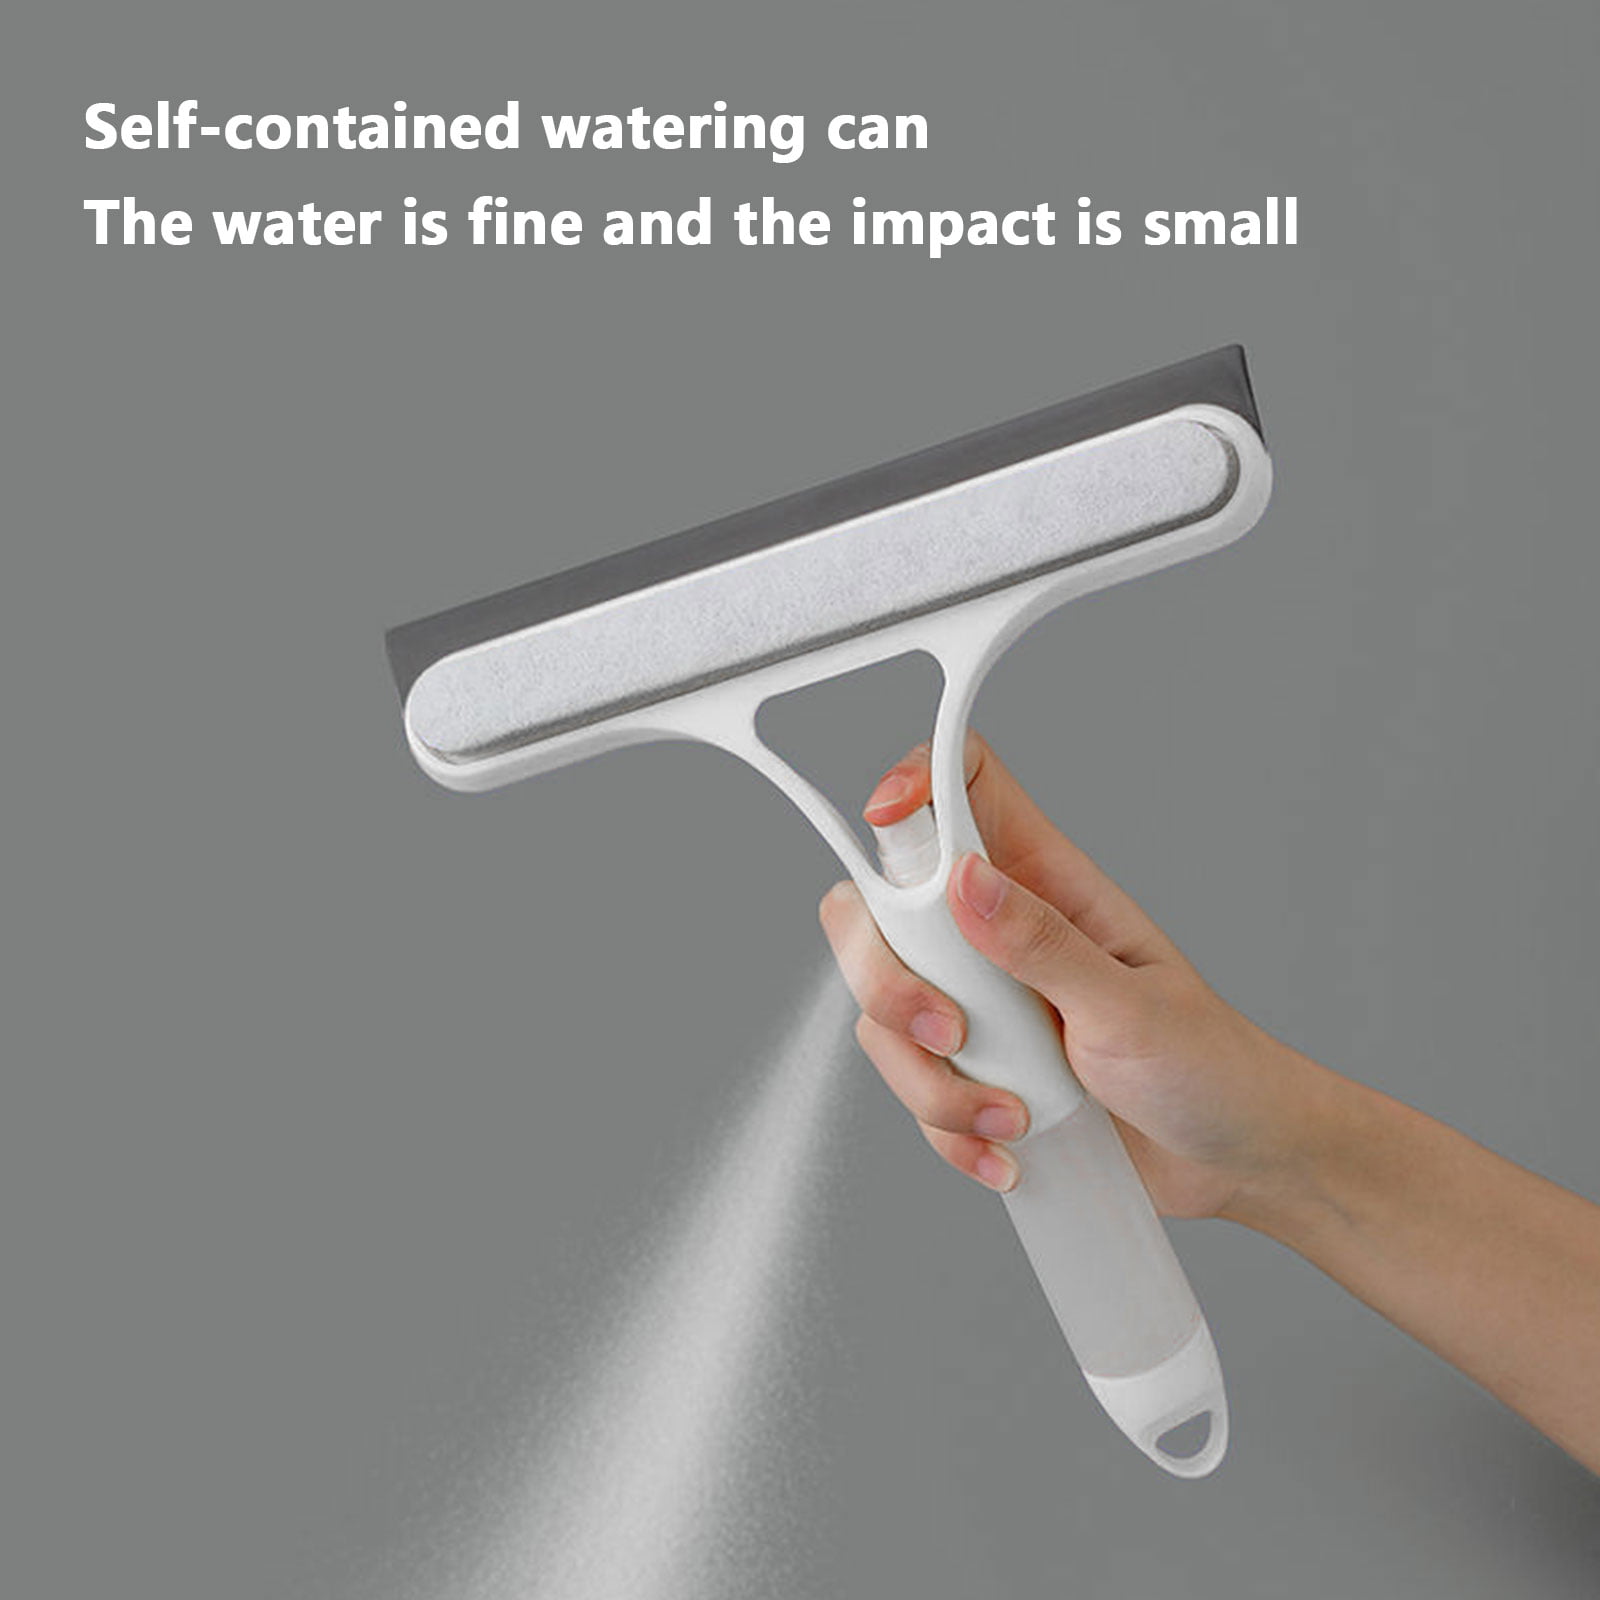 Kruggo® Magic Window Cleaning Brush With Squeegee 5 in 1